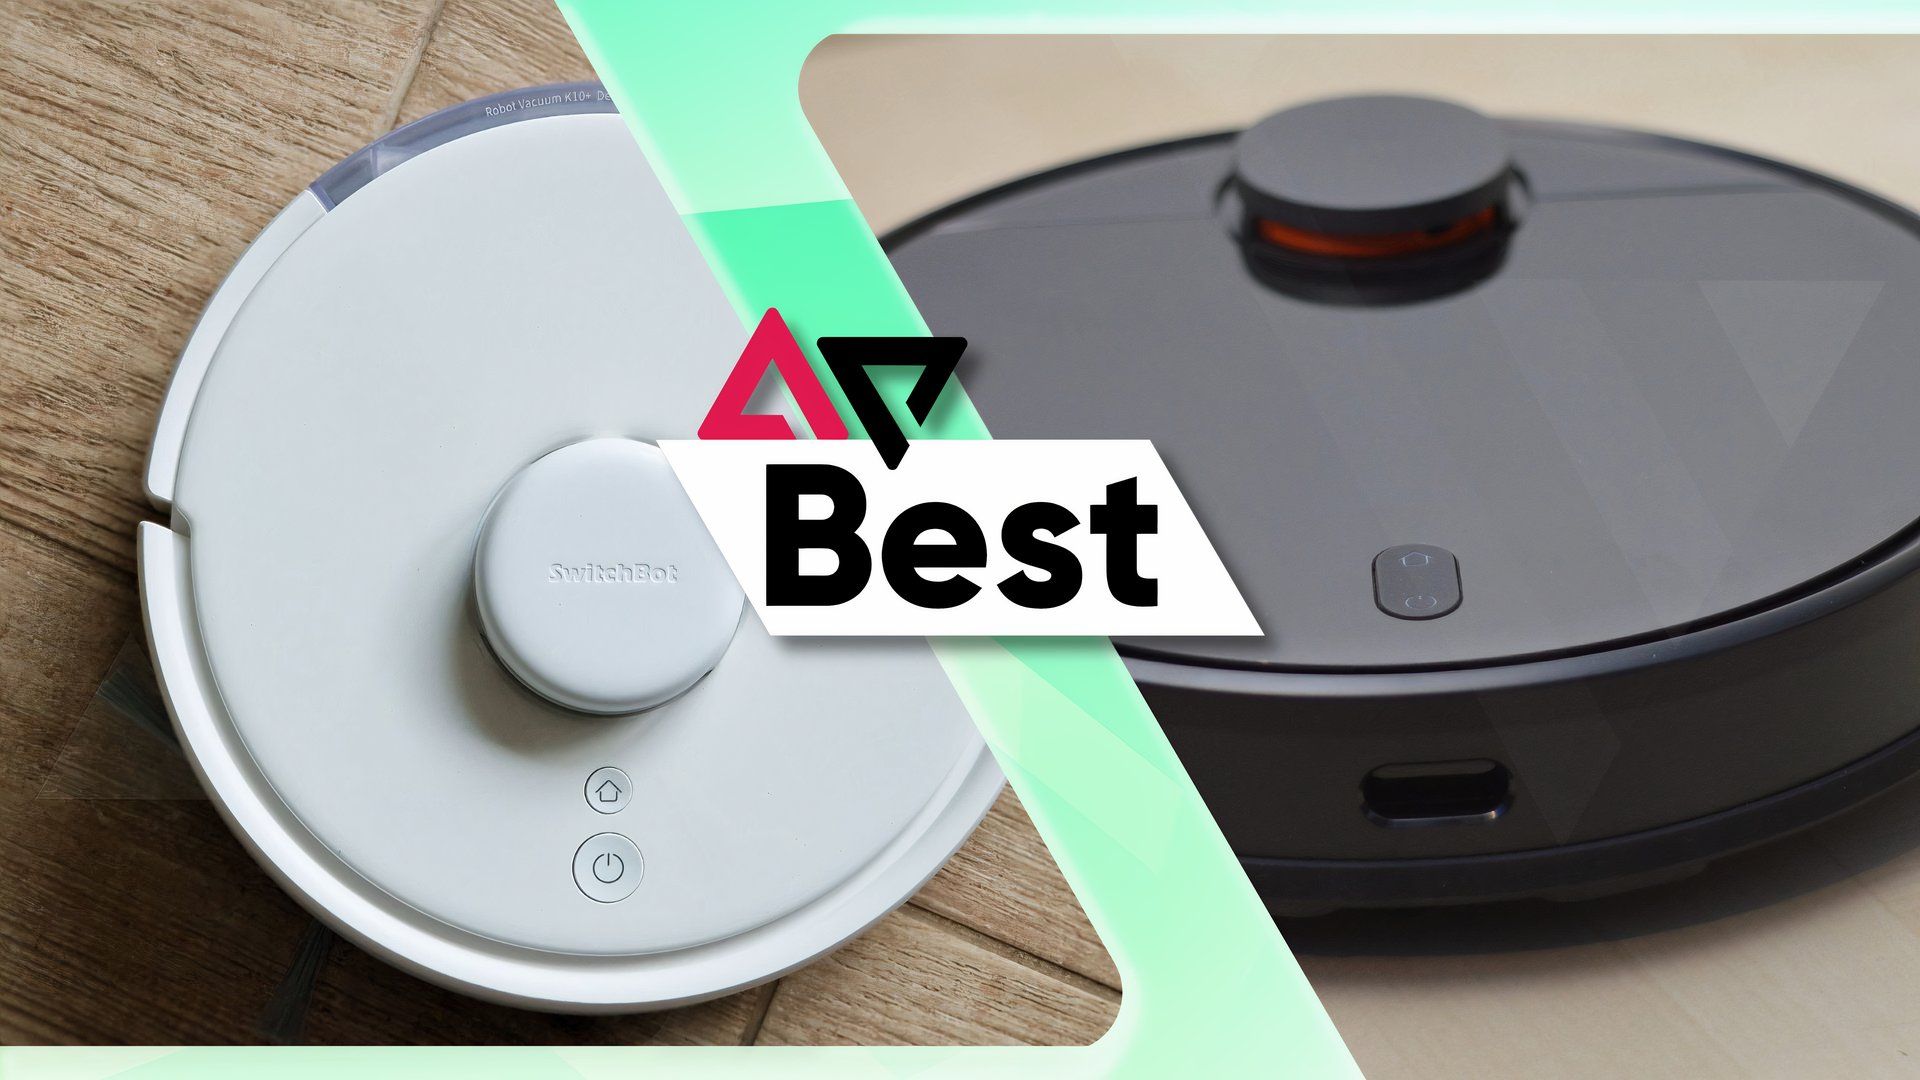 The SwitchBot K10+ and Xiaomi Mi robot vacuum and mop combo with the 'AP Best' logo